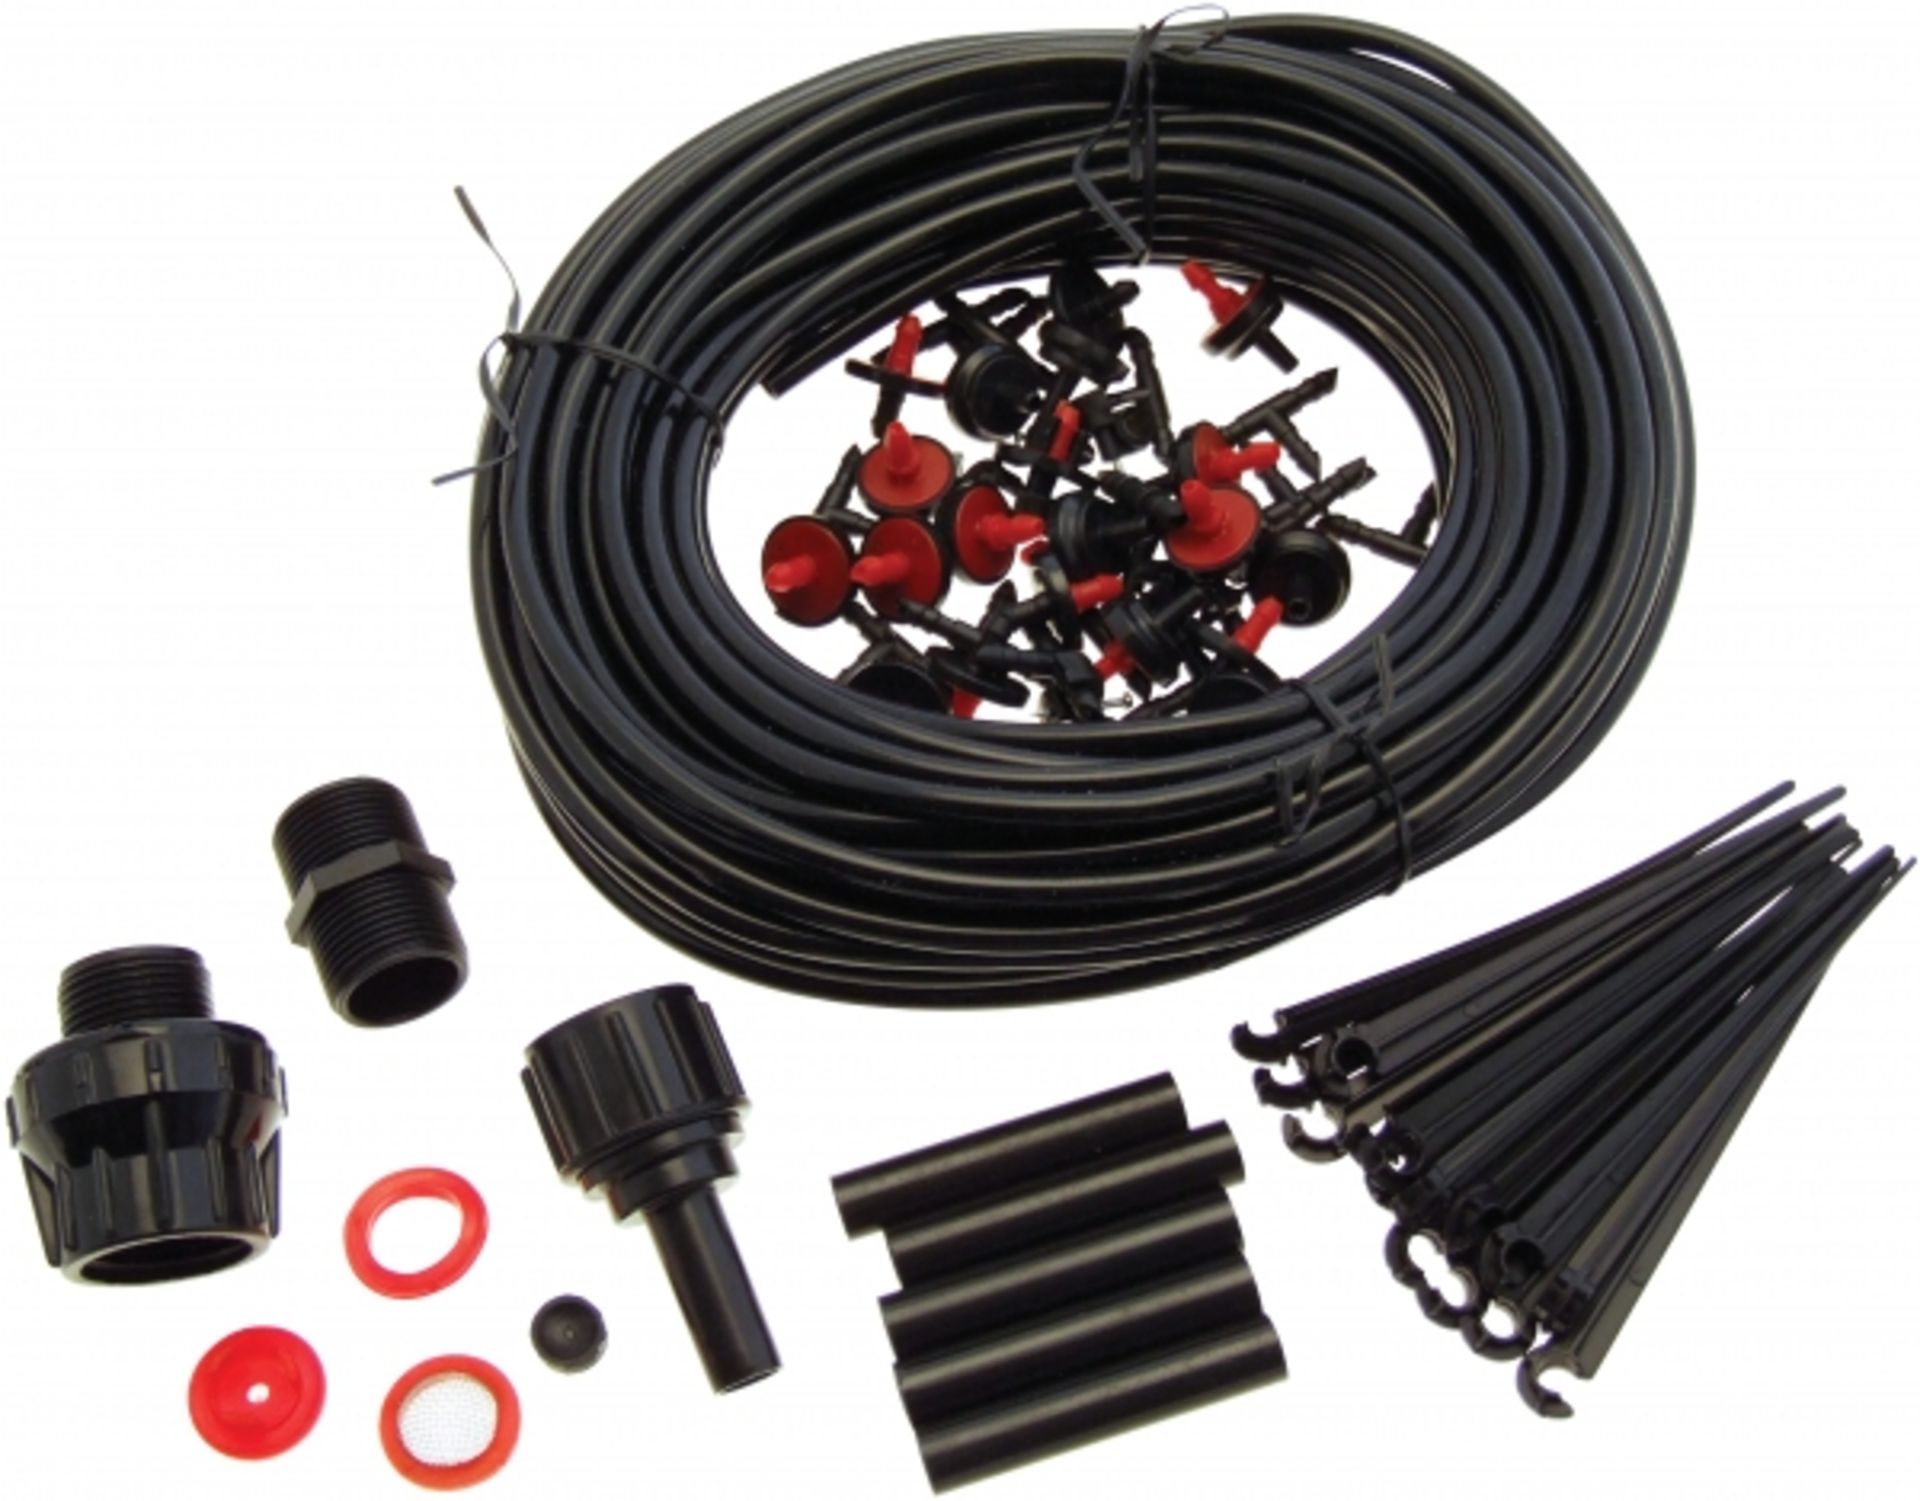 V Brand New Brand New 71 Piece Micro Irrigation Kit X 2 YOUR BID PRICE TO BE MULTIPLIED BY TWO